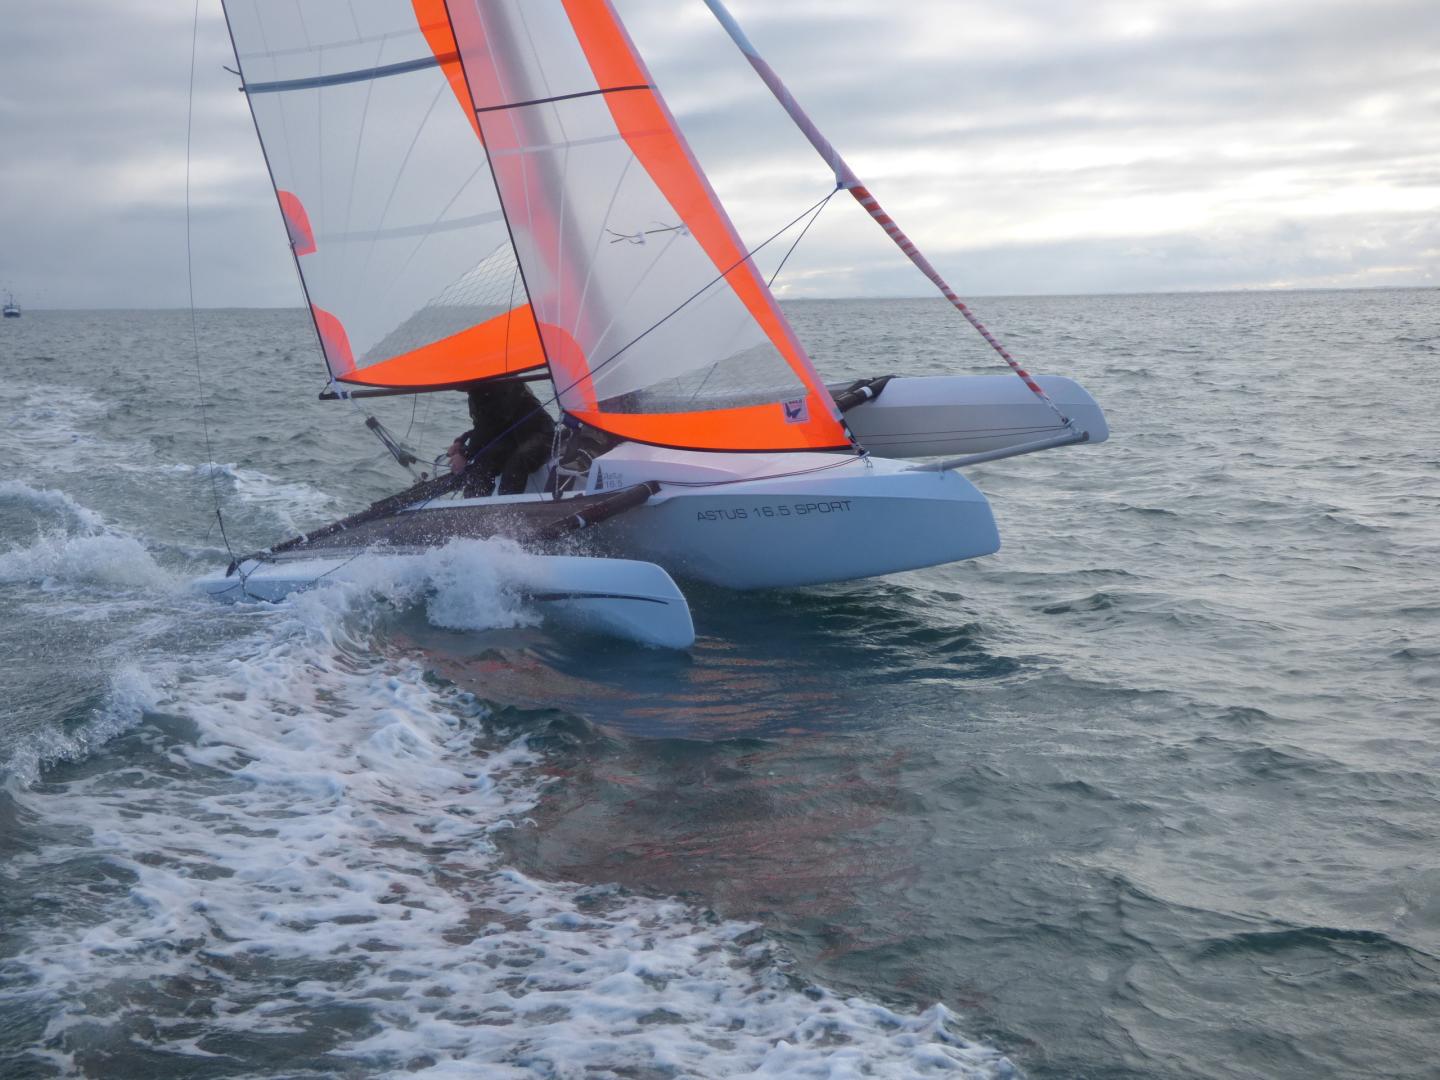 Astus 16.5 trimarano low cost by VPLP